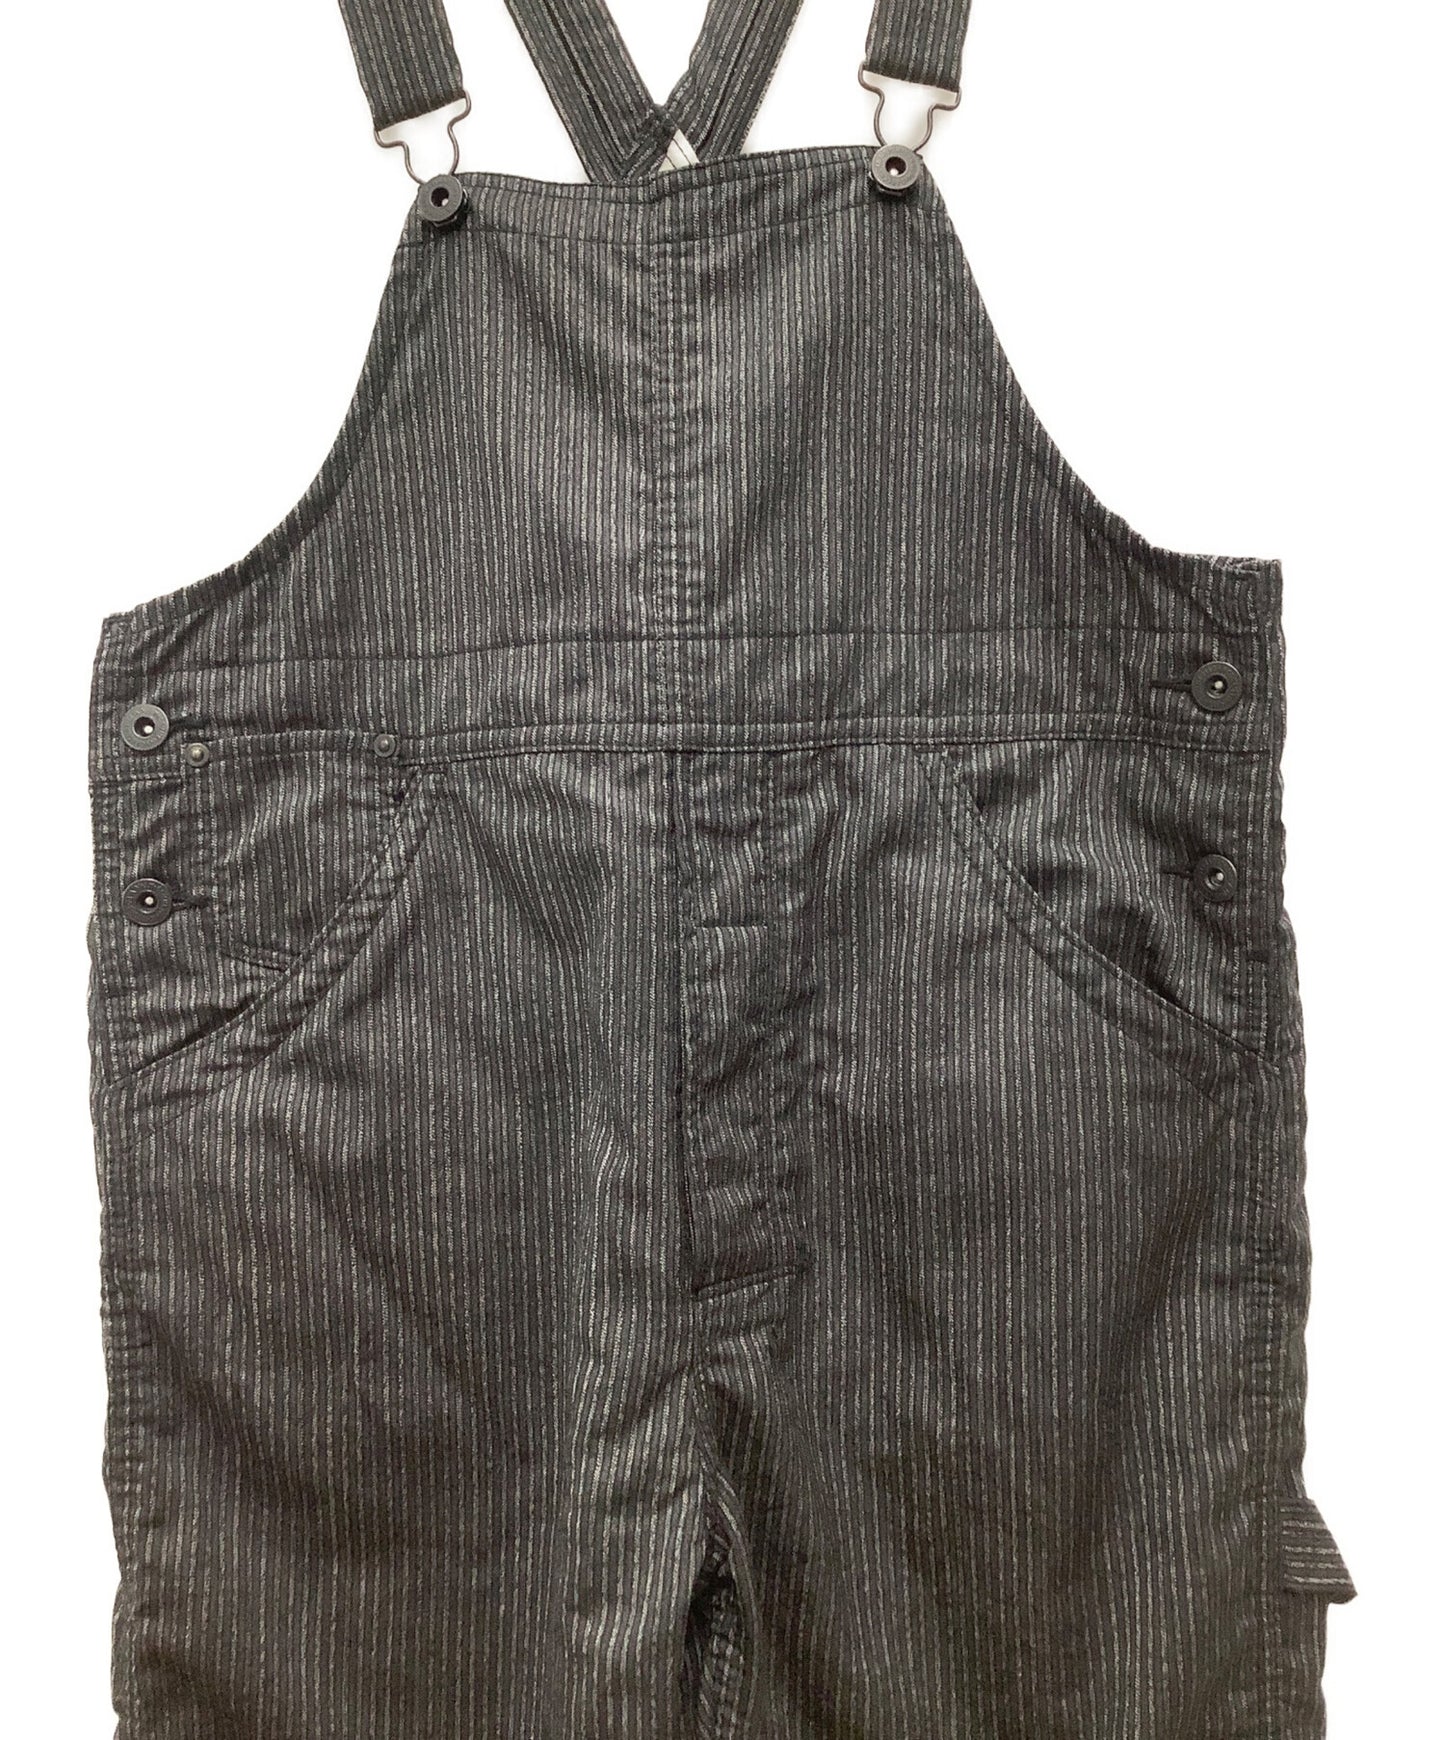 COMME des GARCONS JUNYA WATANABE MAN overall WI-P002